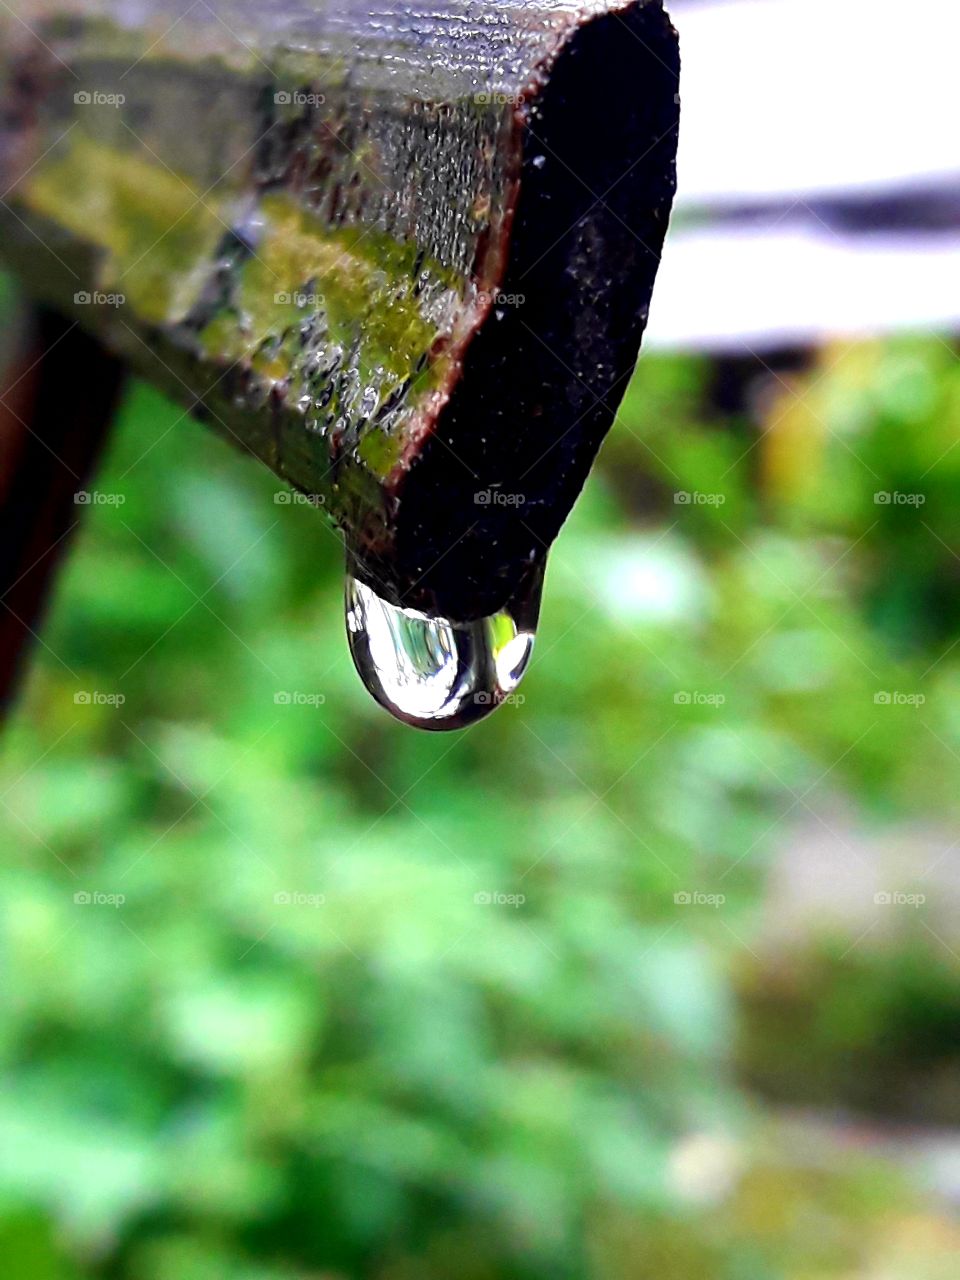 After rain a water drop hanging a old bamboo stick